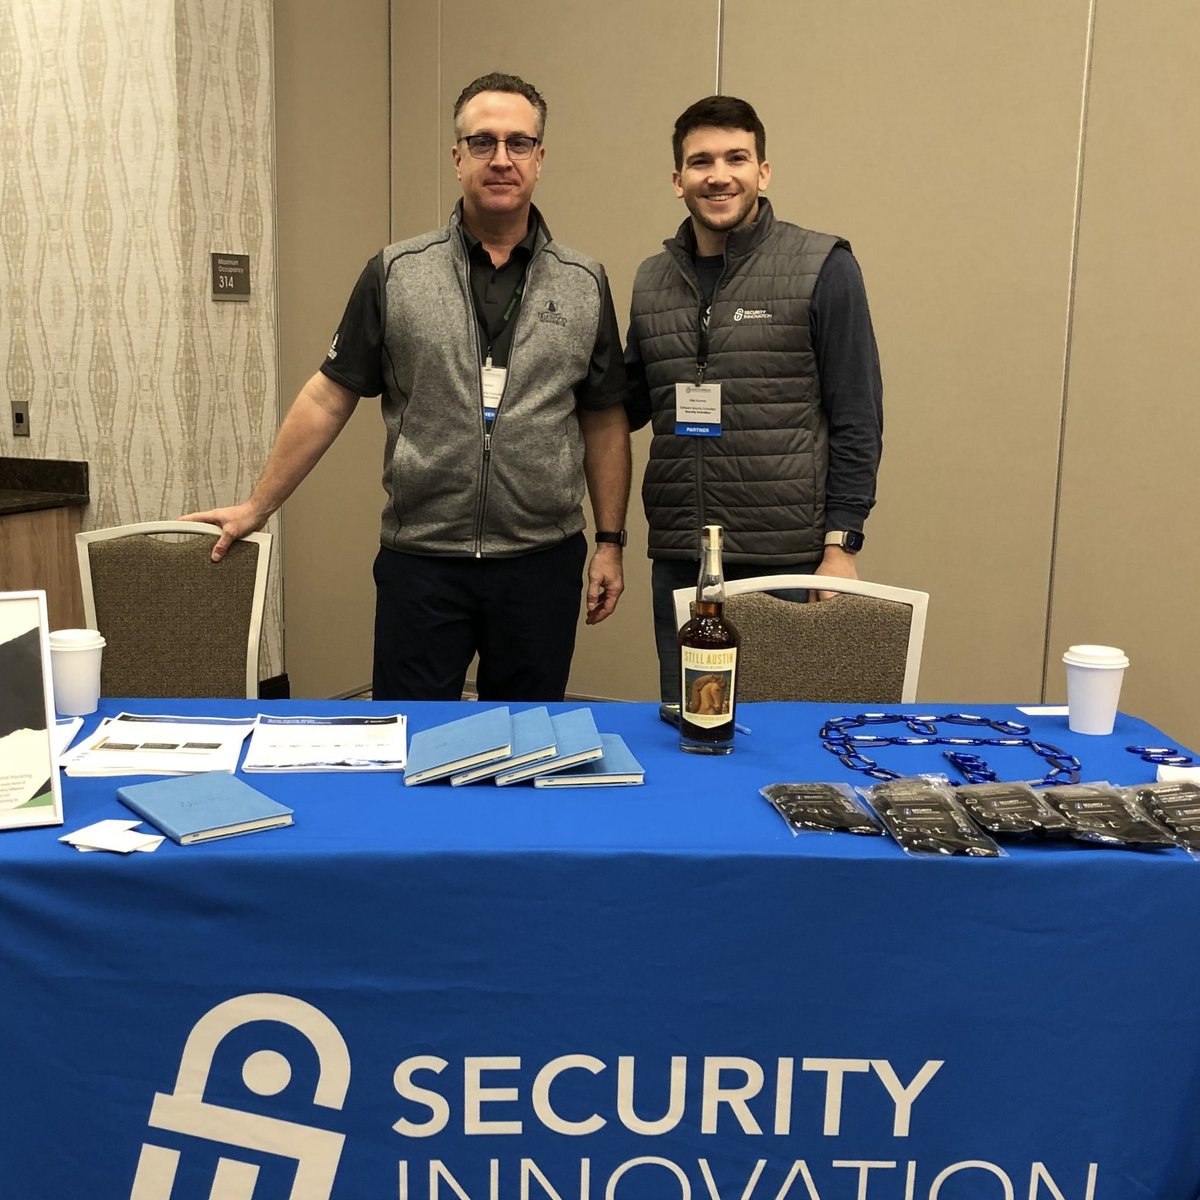 Excited to be in Round Rock for the Data Connectors event!
Stop by and chat with the @SecInnovation team!
#Austintech #appsec